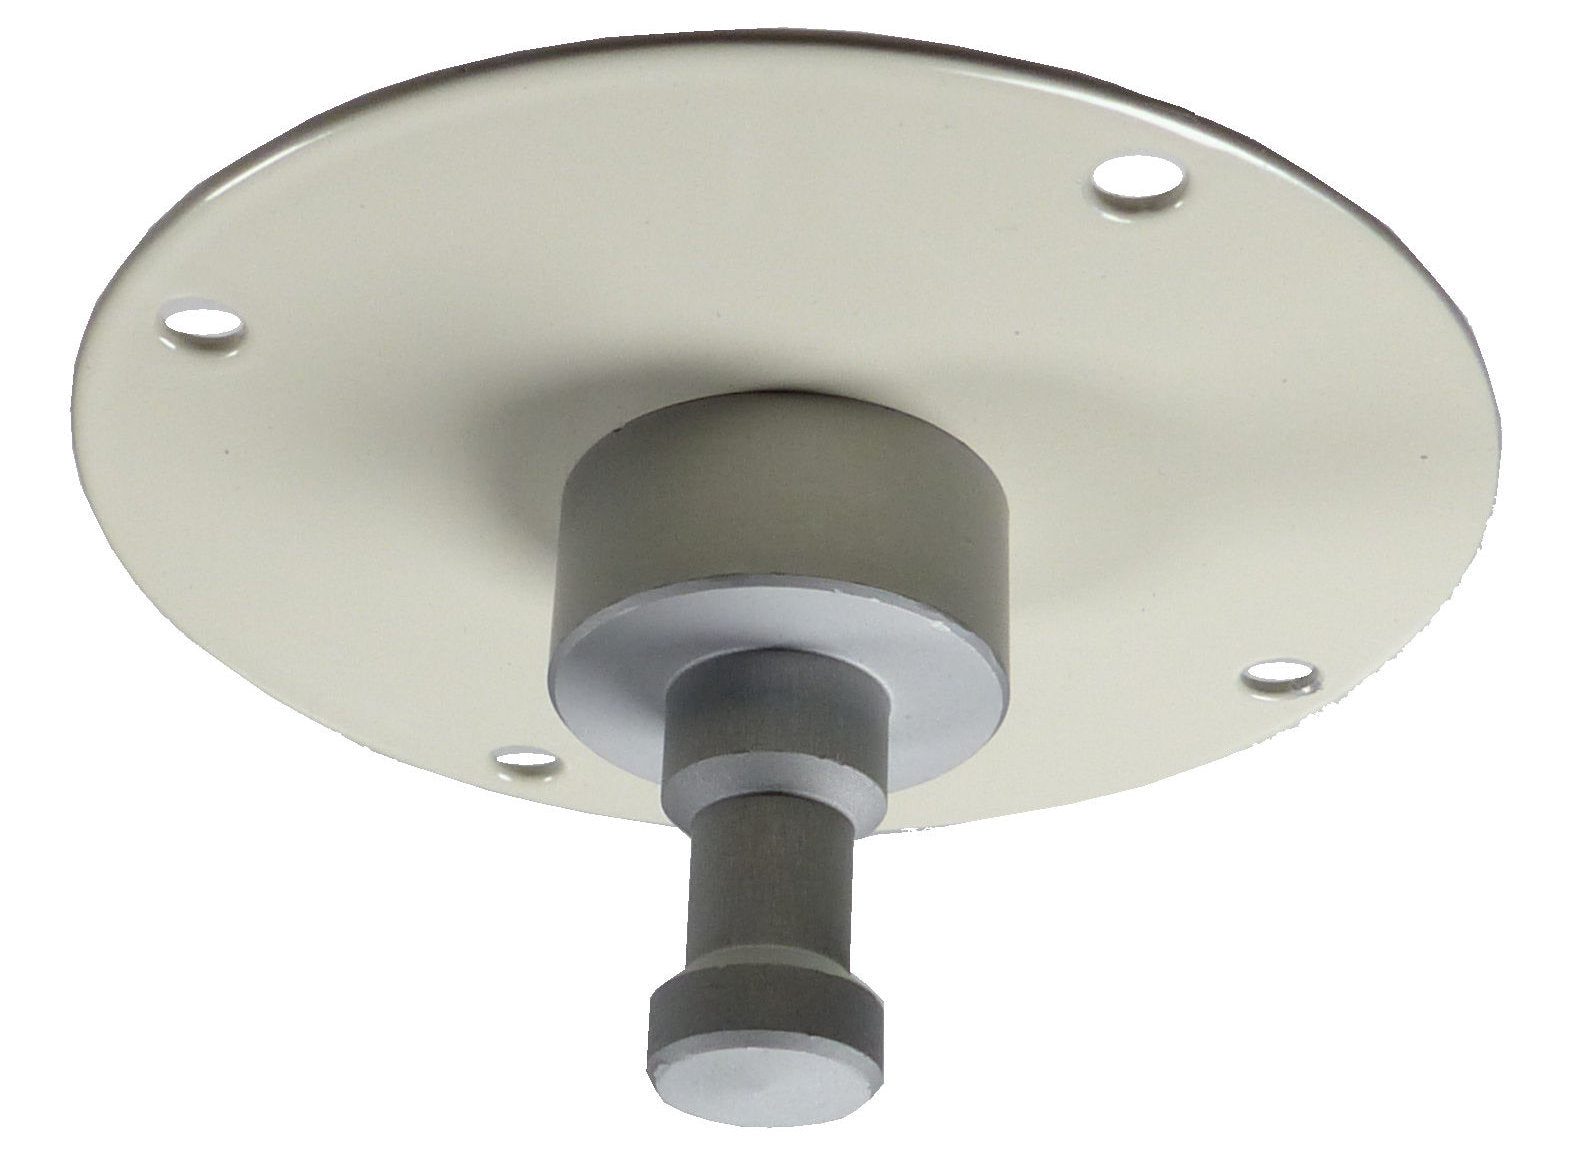 Alzo Screw Ceiling Mount Plate With 5 8 Stud